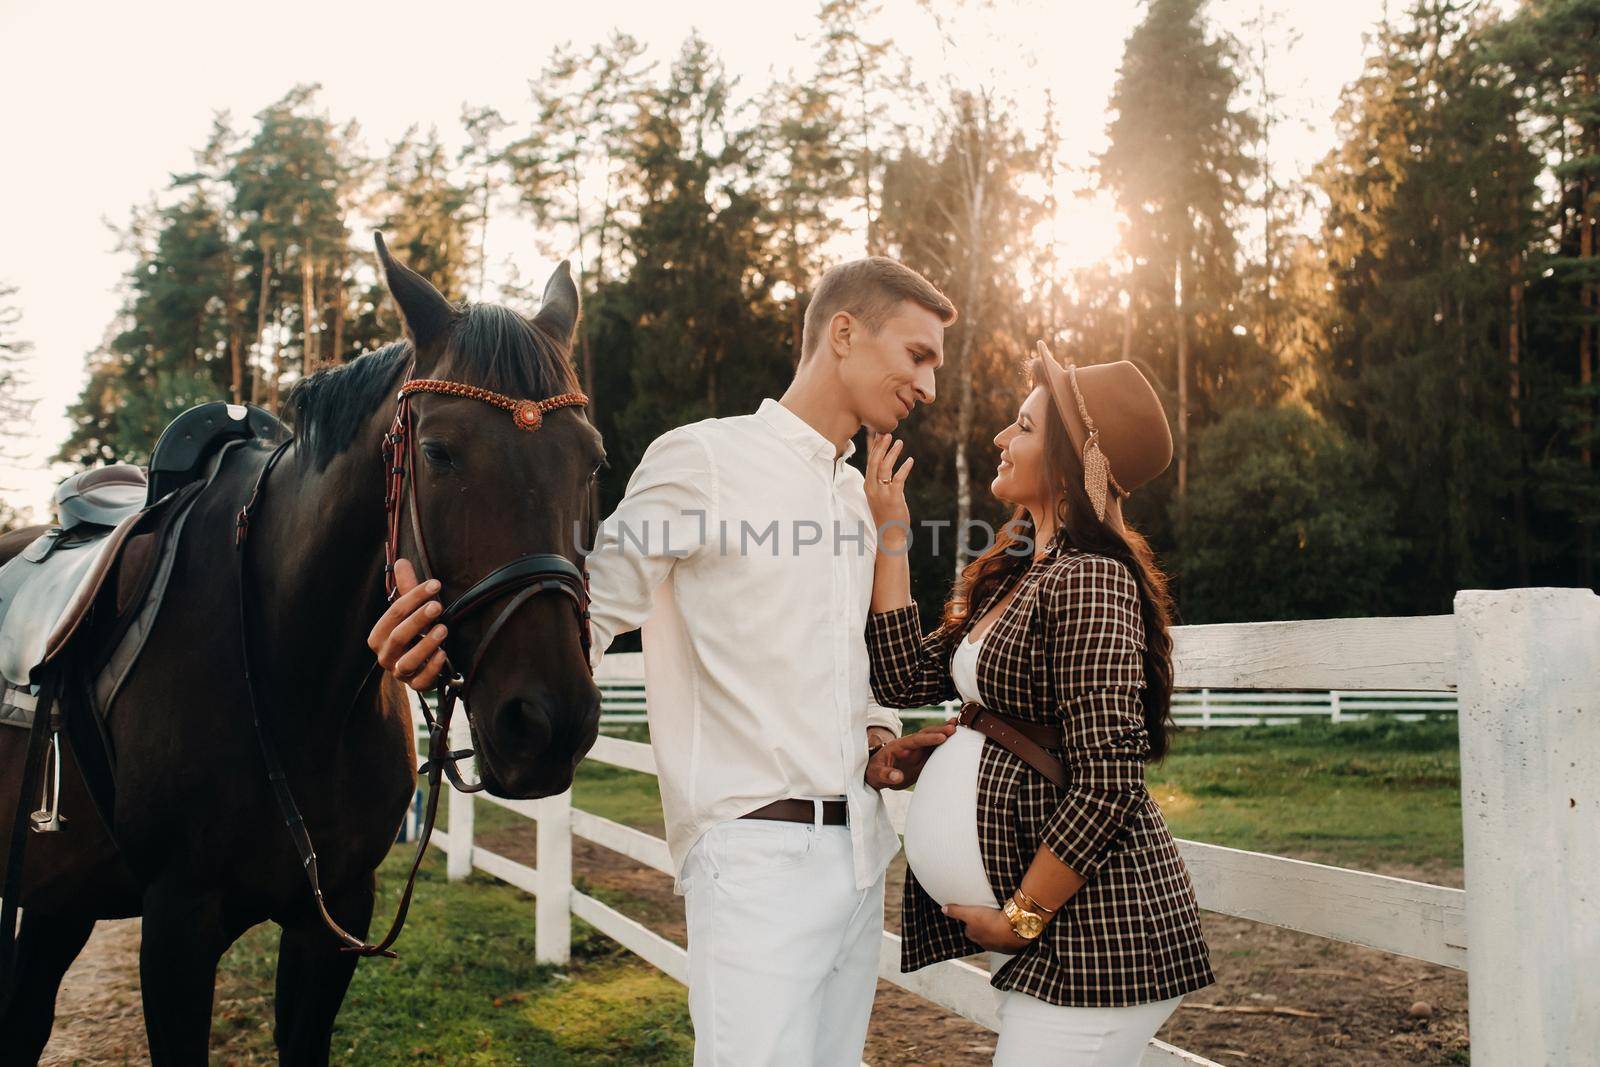 a pregnant girl in a hat and a man in white clothes stand next to horses at a White fence.Stylish family waiting for a child strolling in nature by Lobachad